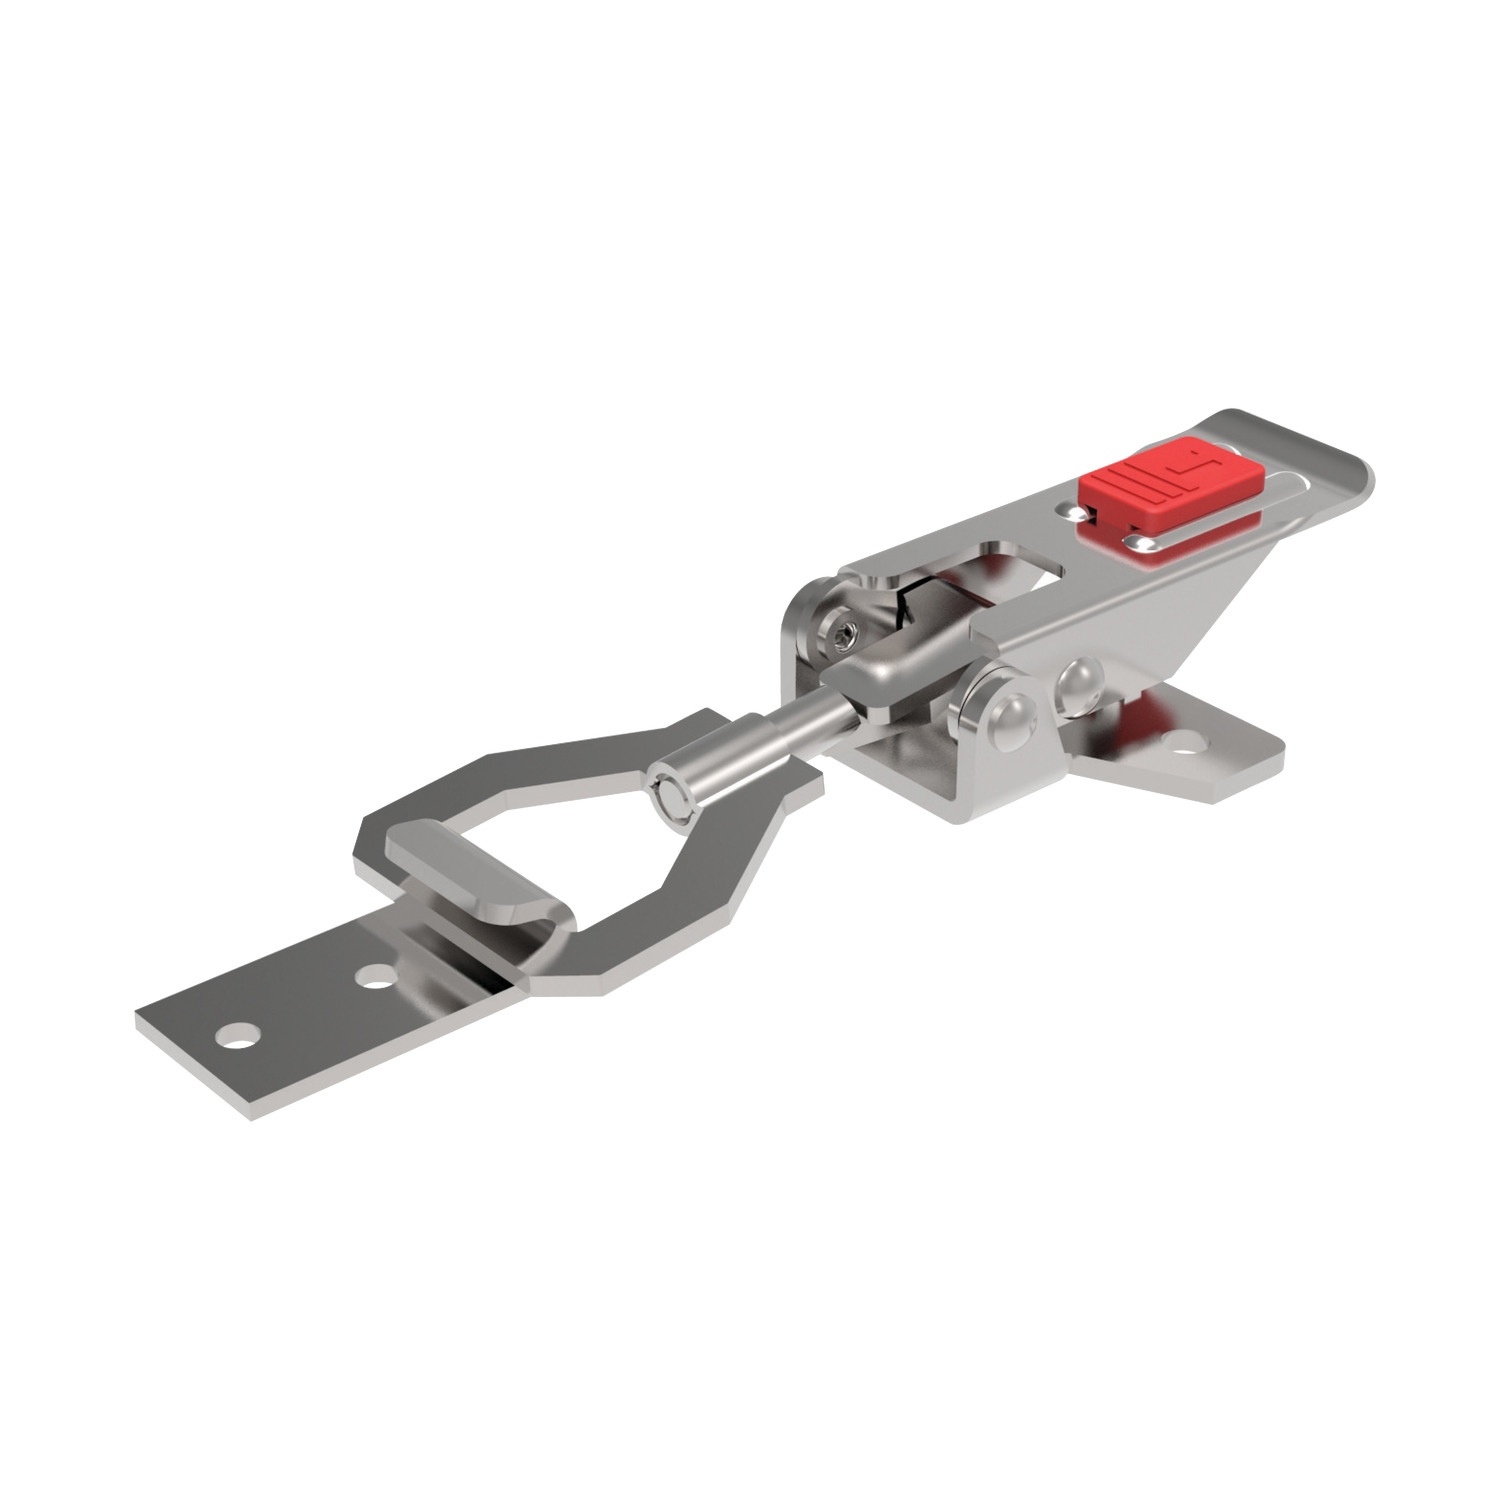 Draw Latches - Adj. Draw - Secondary Lock Toggle latches with adjustable secondary lock, available in steel or stainless steel. Draw length adjustable through turns of threaded raw rod for up to 12mm of adjustment.